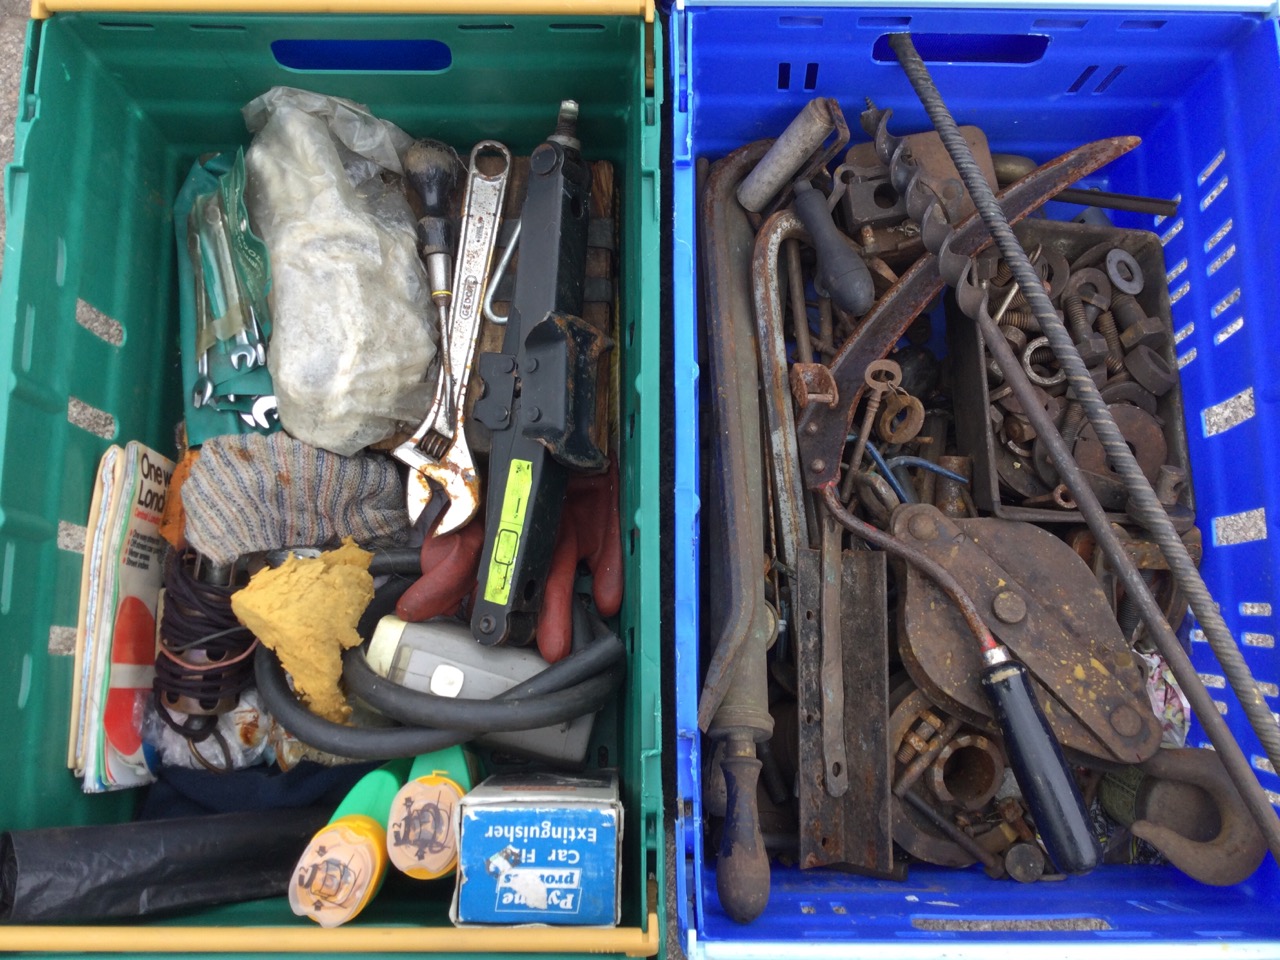 Miscellaneous tools including axes, spanners, pulleys, a jack, pumps, a pressure gauge, nuts & - Image 2 of 3